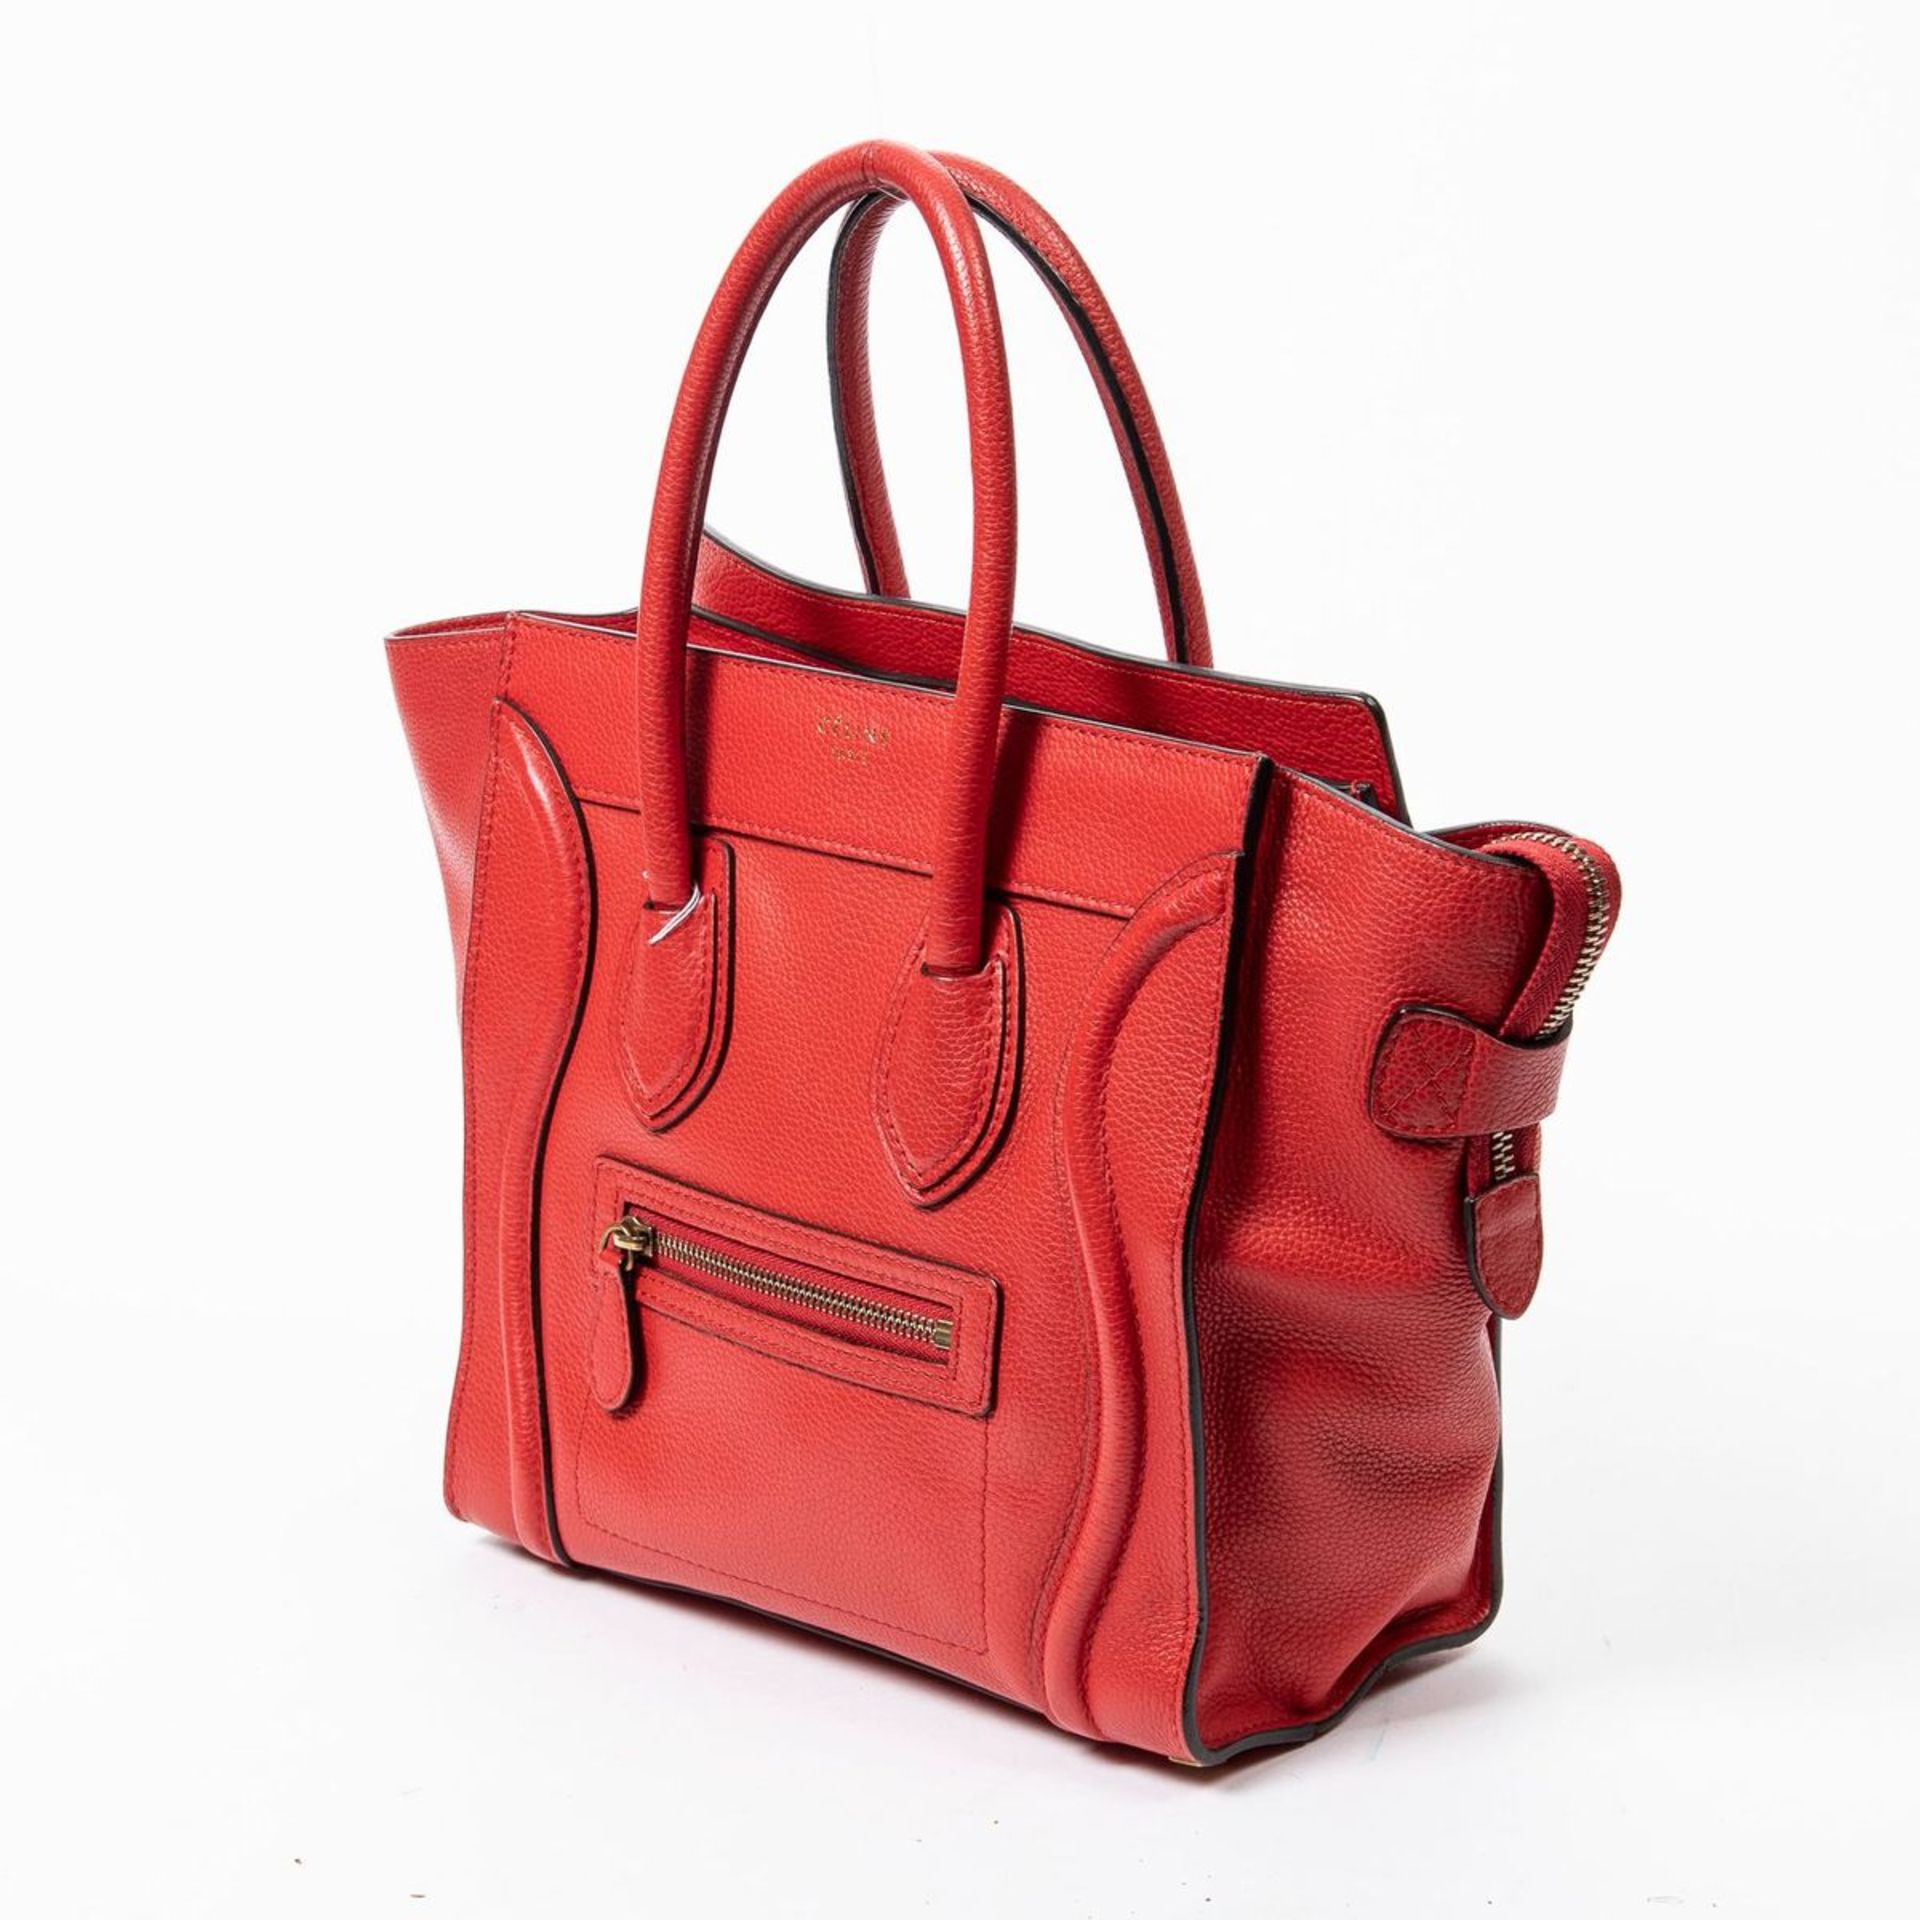 RRP £2615 Celine Luggage in Red Handbag - AAN4832 - Grade A Please Contact Us Directly For - Image 2 of 4